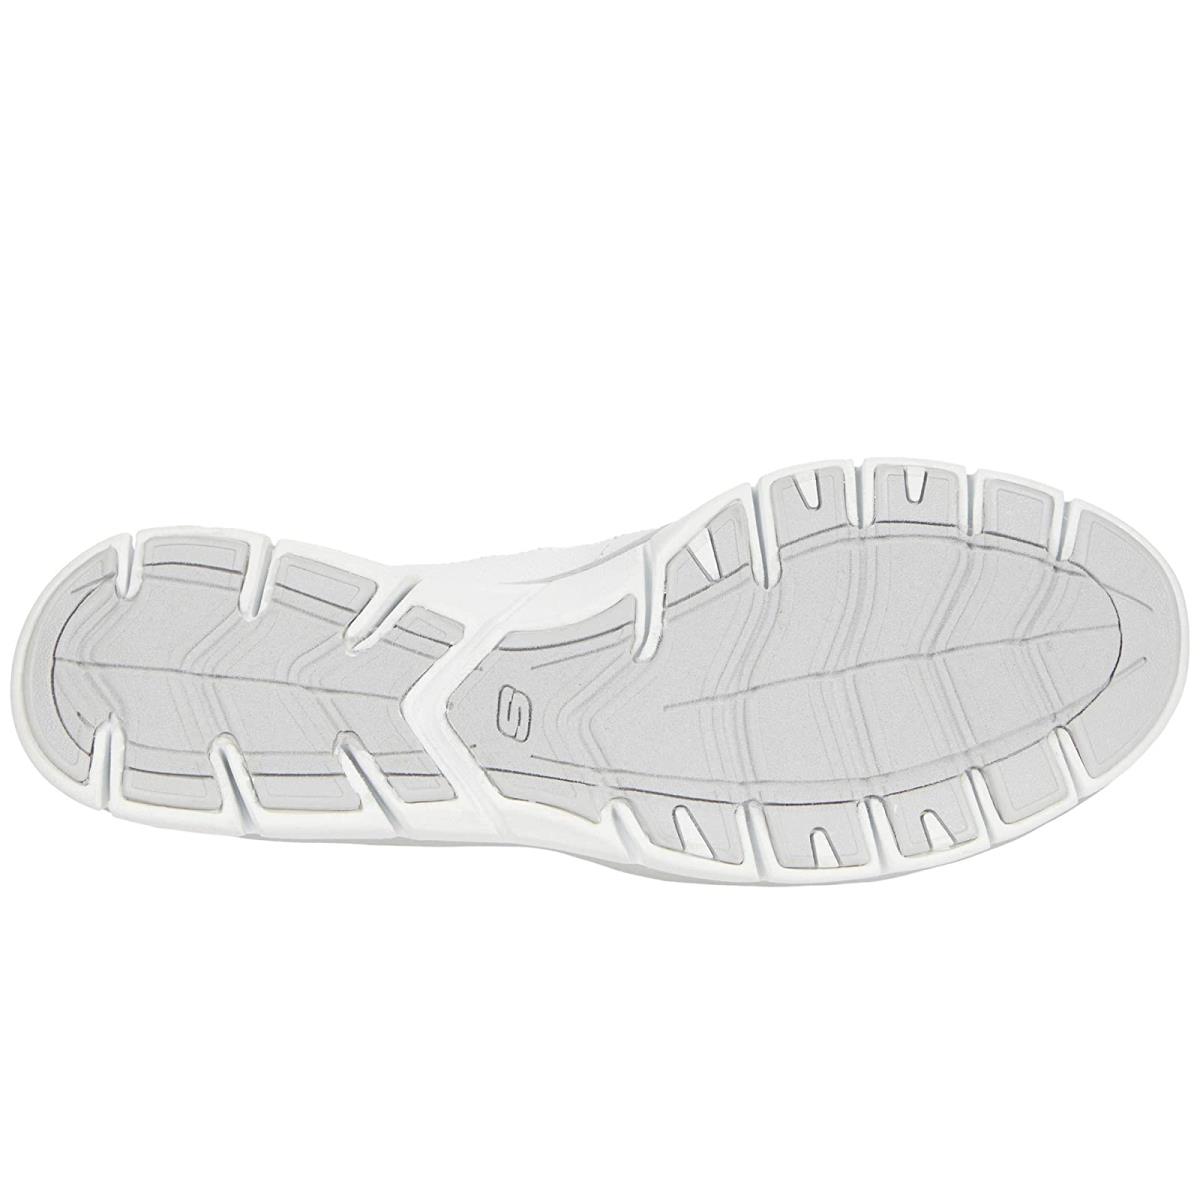 Skechers shoes  - White/Silver 1